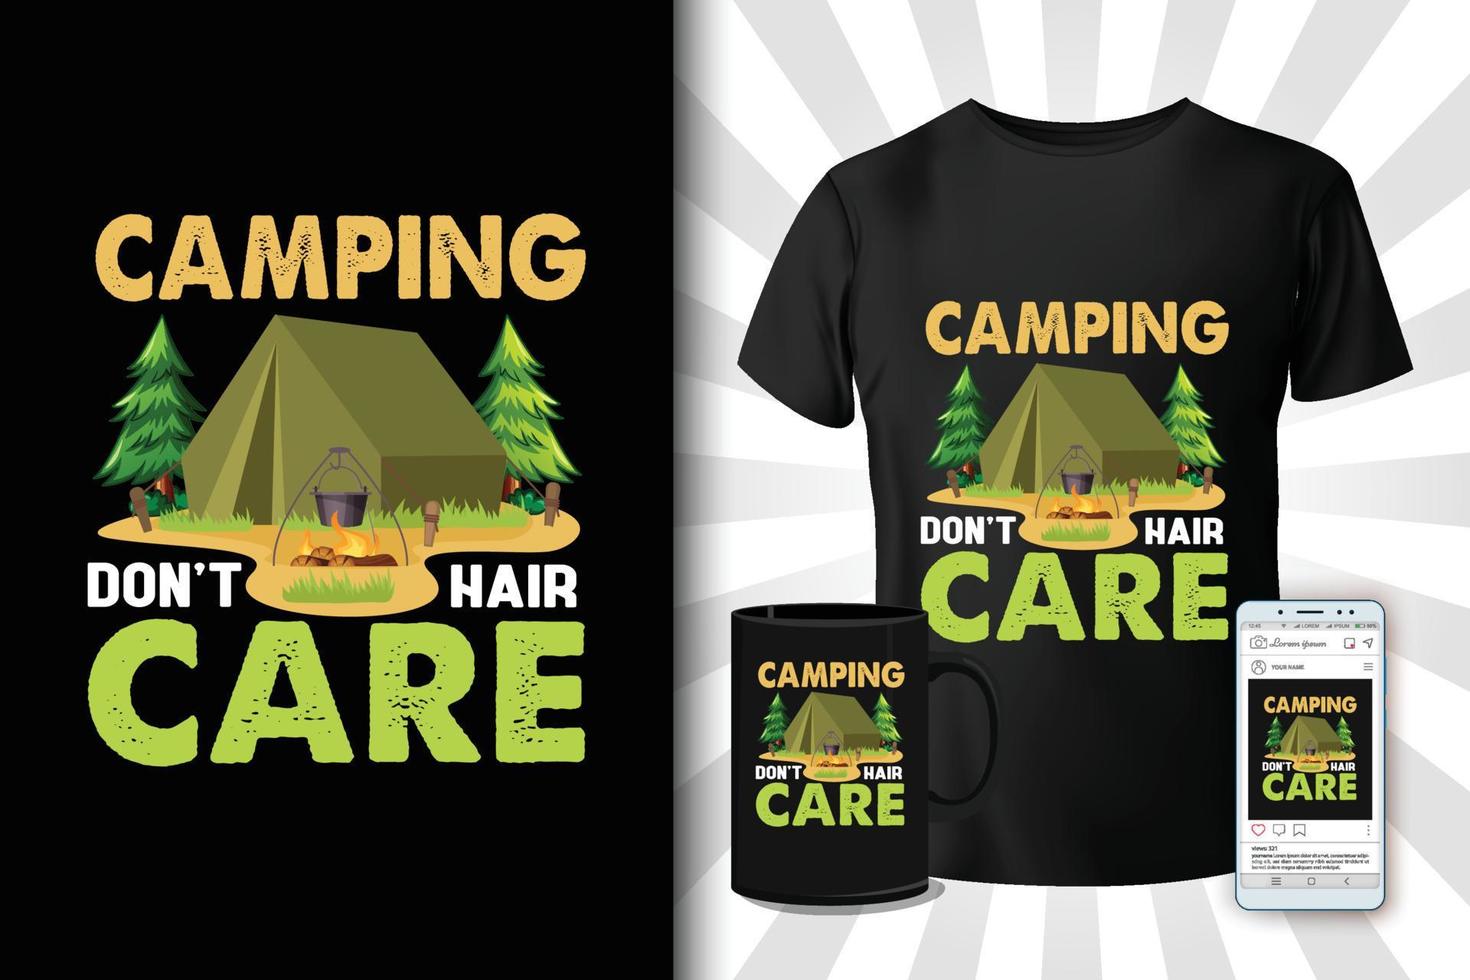 Camping don't hair care t-shirt design vector